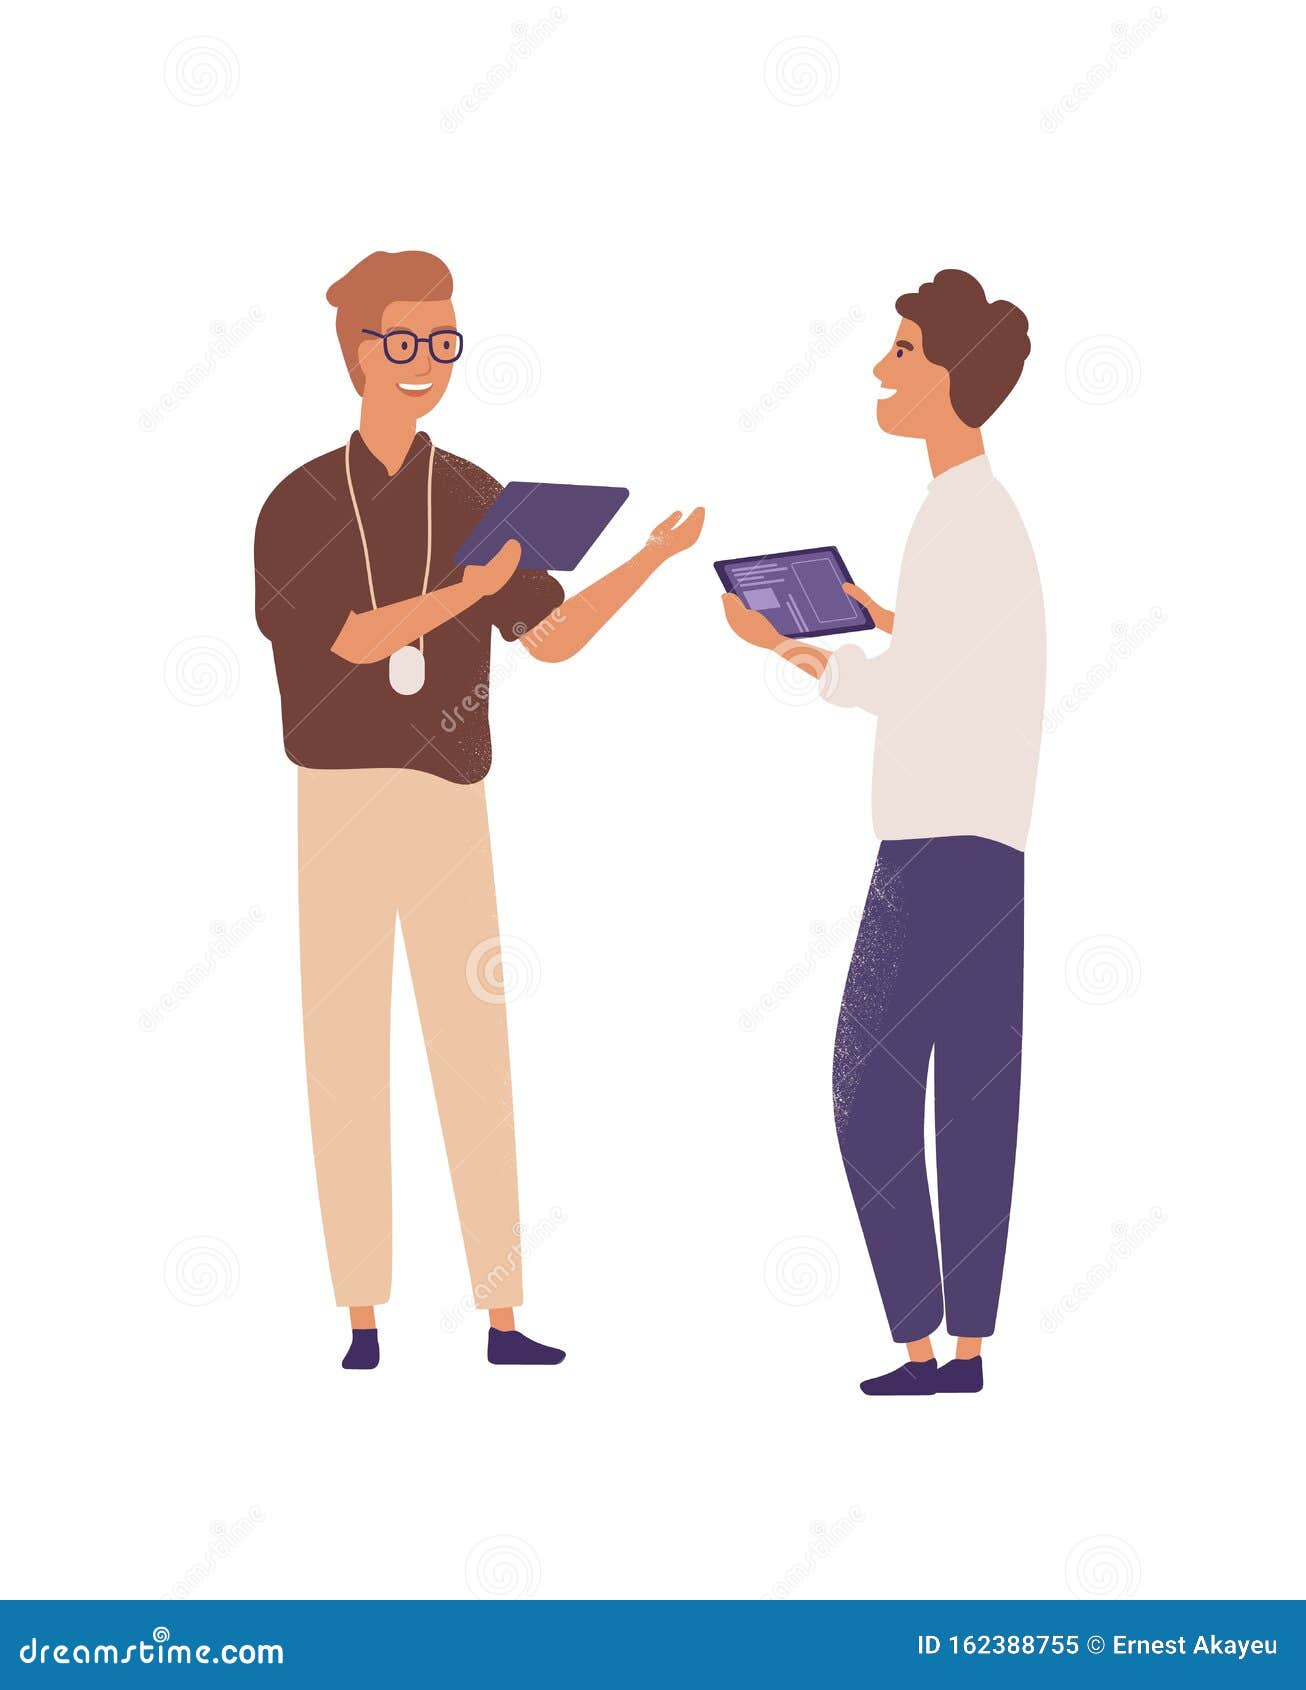 Businessmen with Tablets Flat Vector Illustration. Colleagues Having  Conversation Cartoon Characters Stock Vector - Illustration of device,  colleague: 162388755